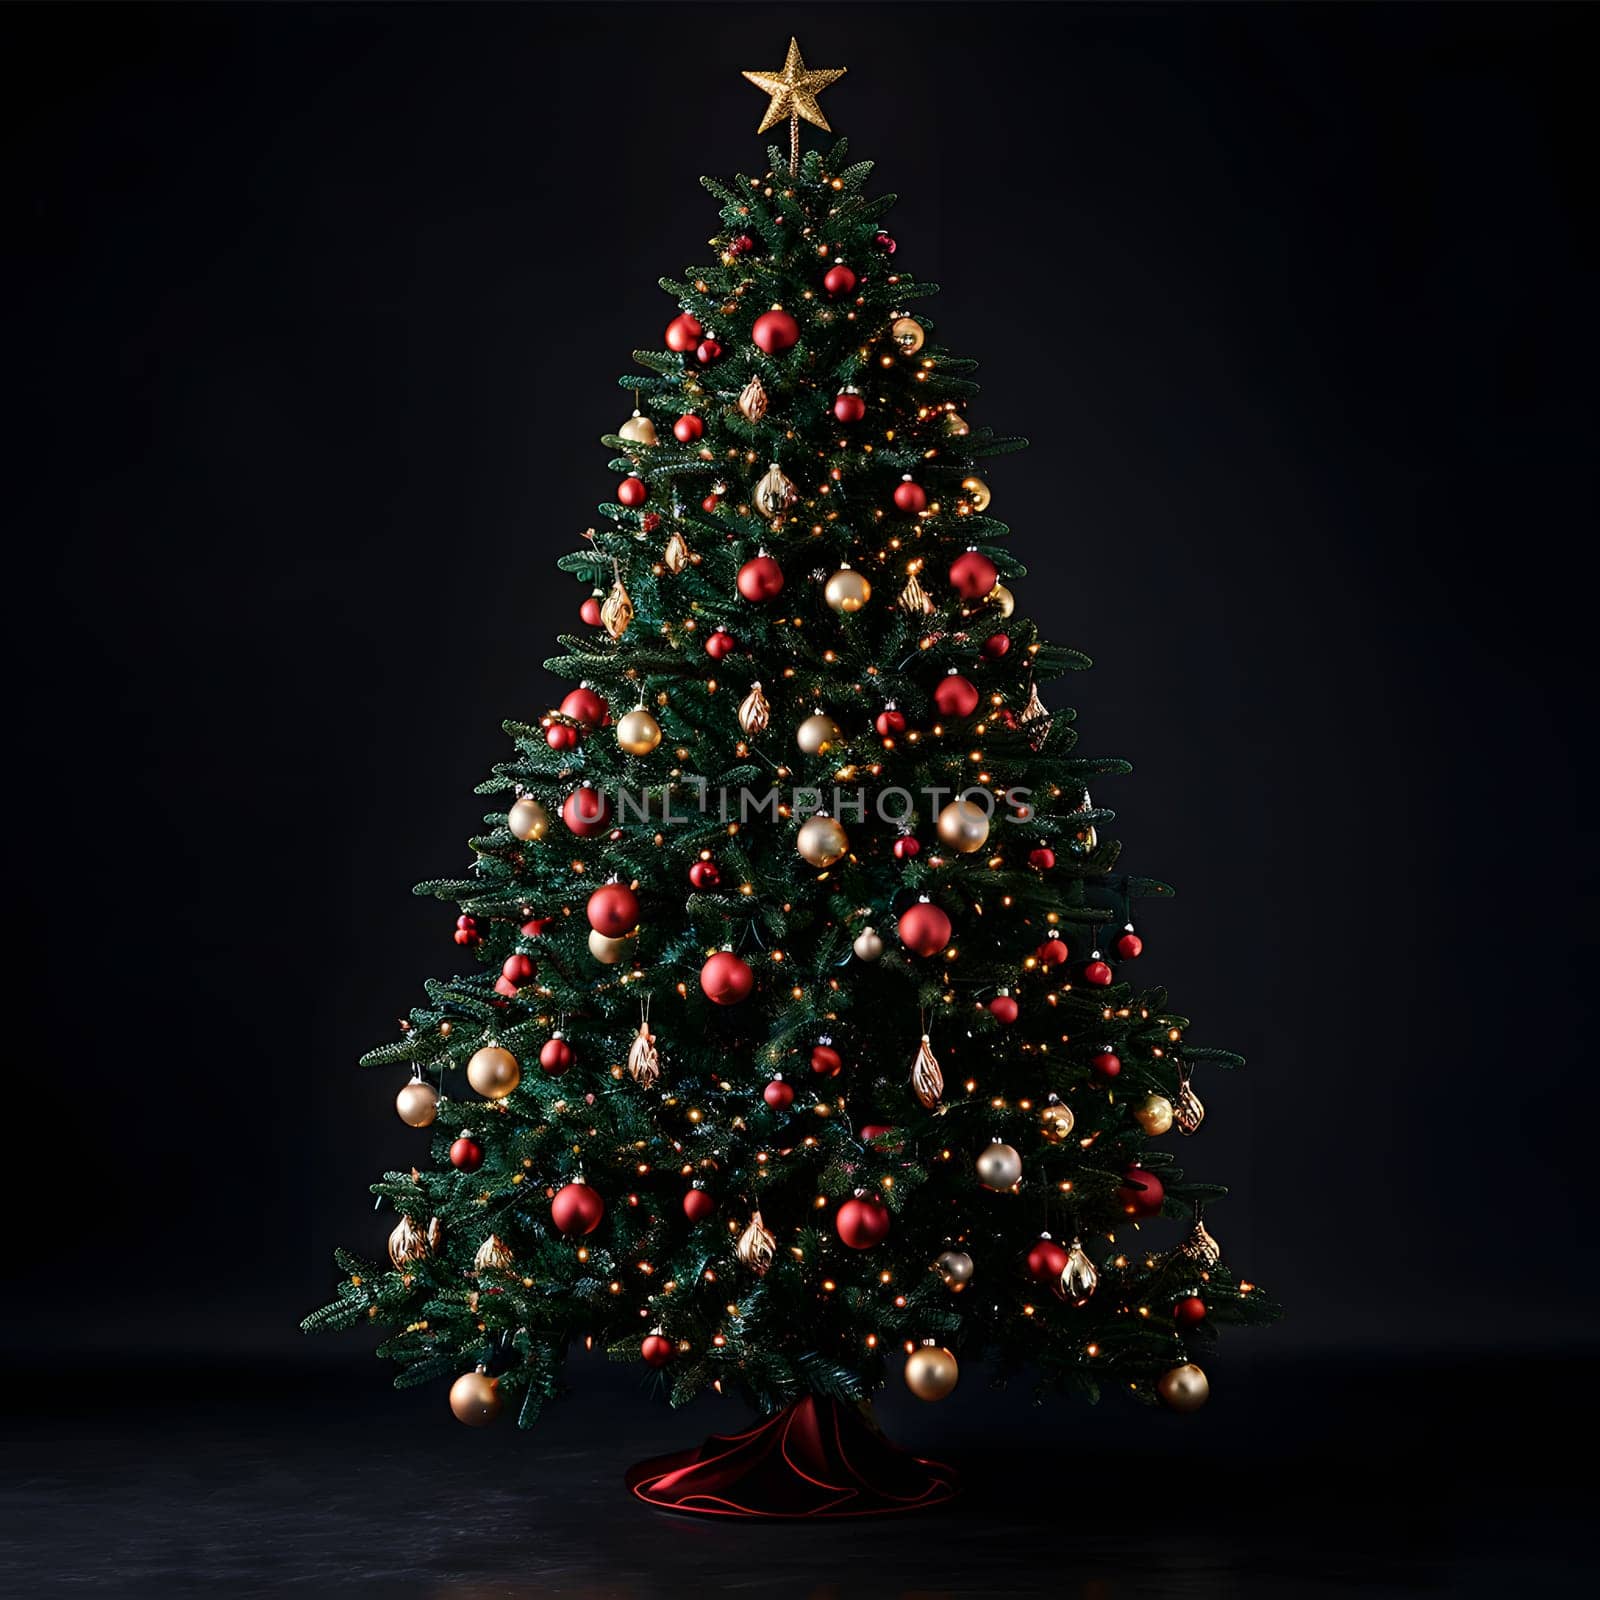 Evergreen tree adorned with red and gold ornaments, topped with a gold star by Nadtochiy